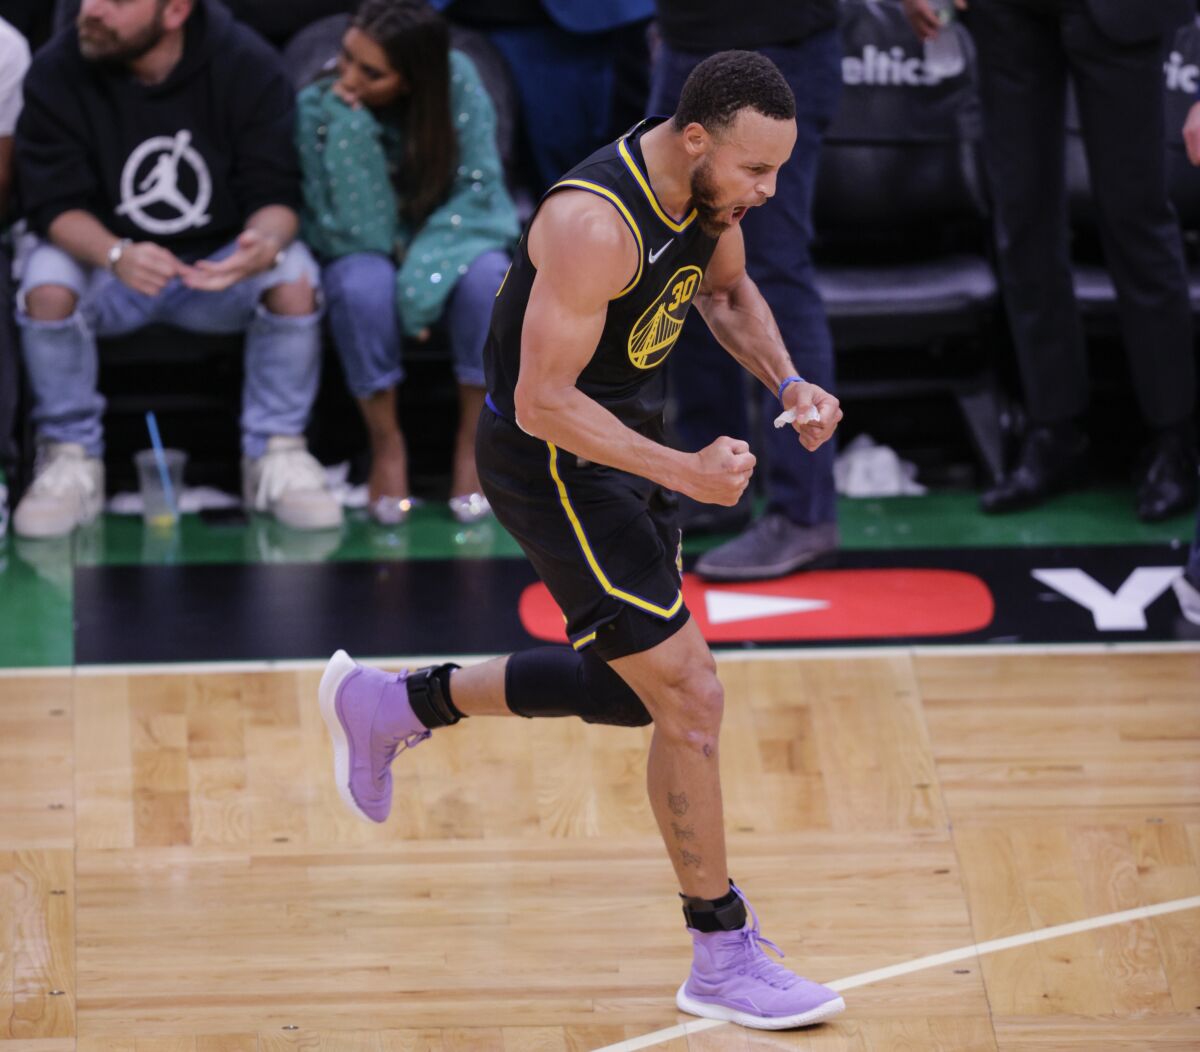 Golden State Warriors' Stephen Curry, 30, reacts after hitting a three pointer during the fourth quarter of Game 4 of basketball's NBA Finals, in Boston, Mass., on Friday, June 10, 2022. (Carlos Avila Gonzalez/San Francisco Chronicle via AP)